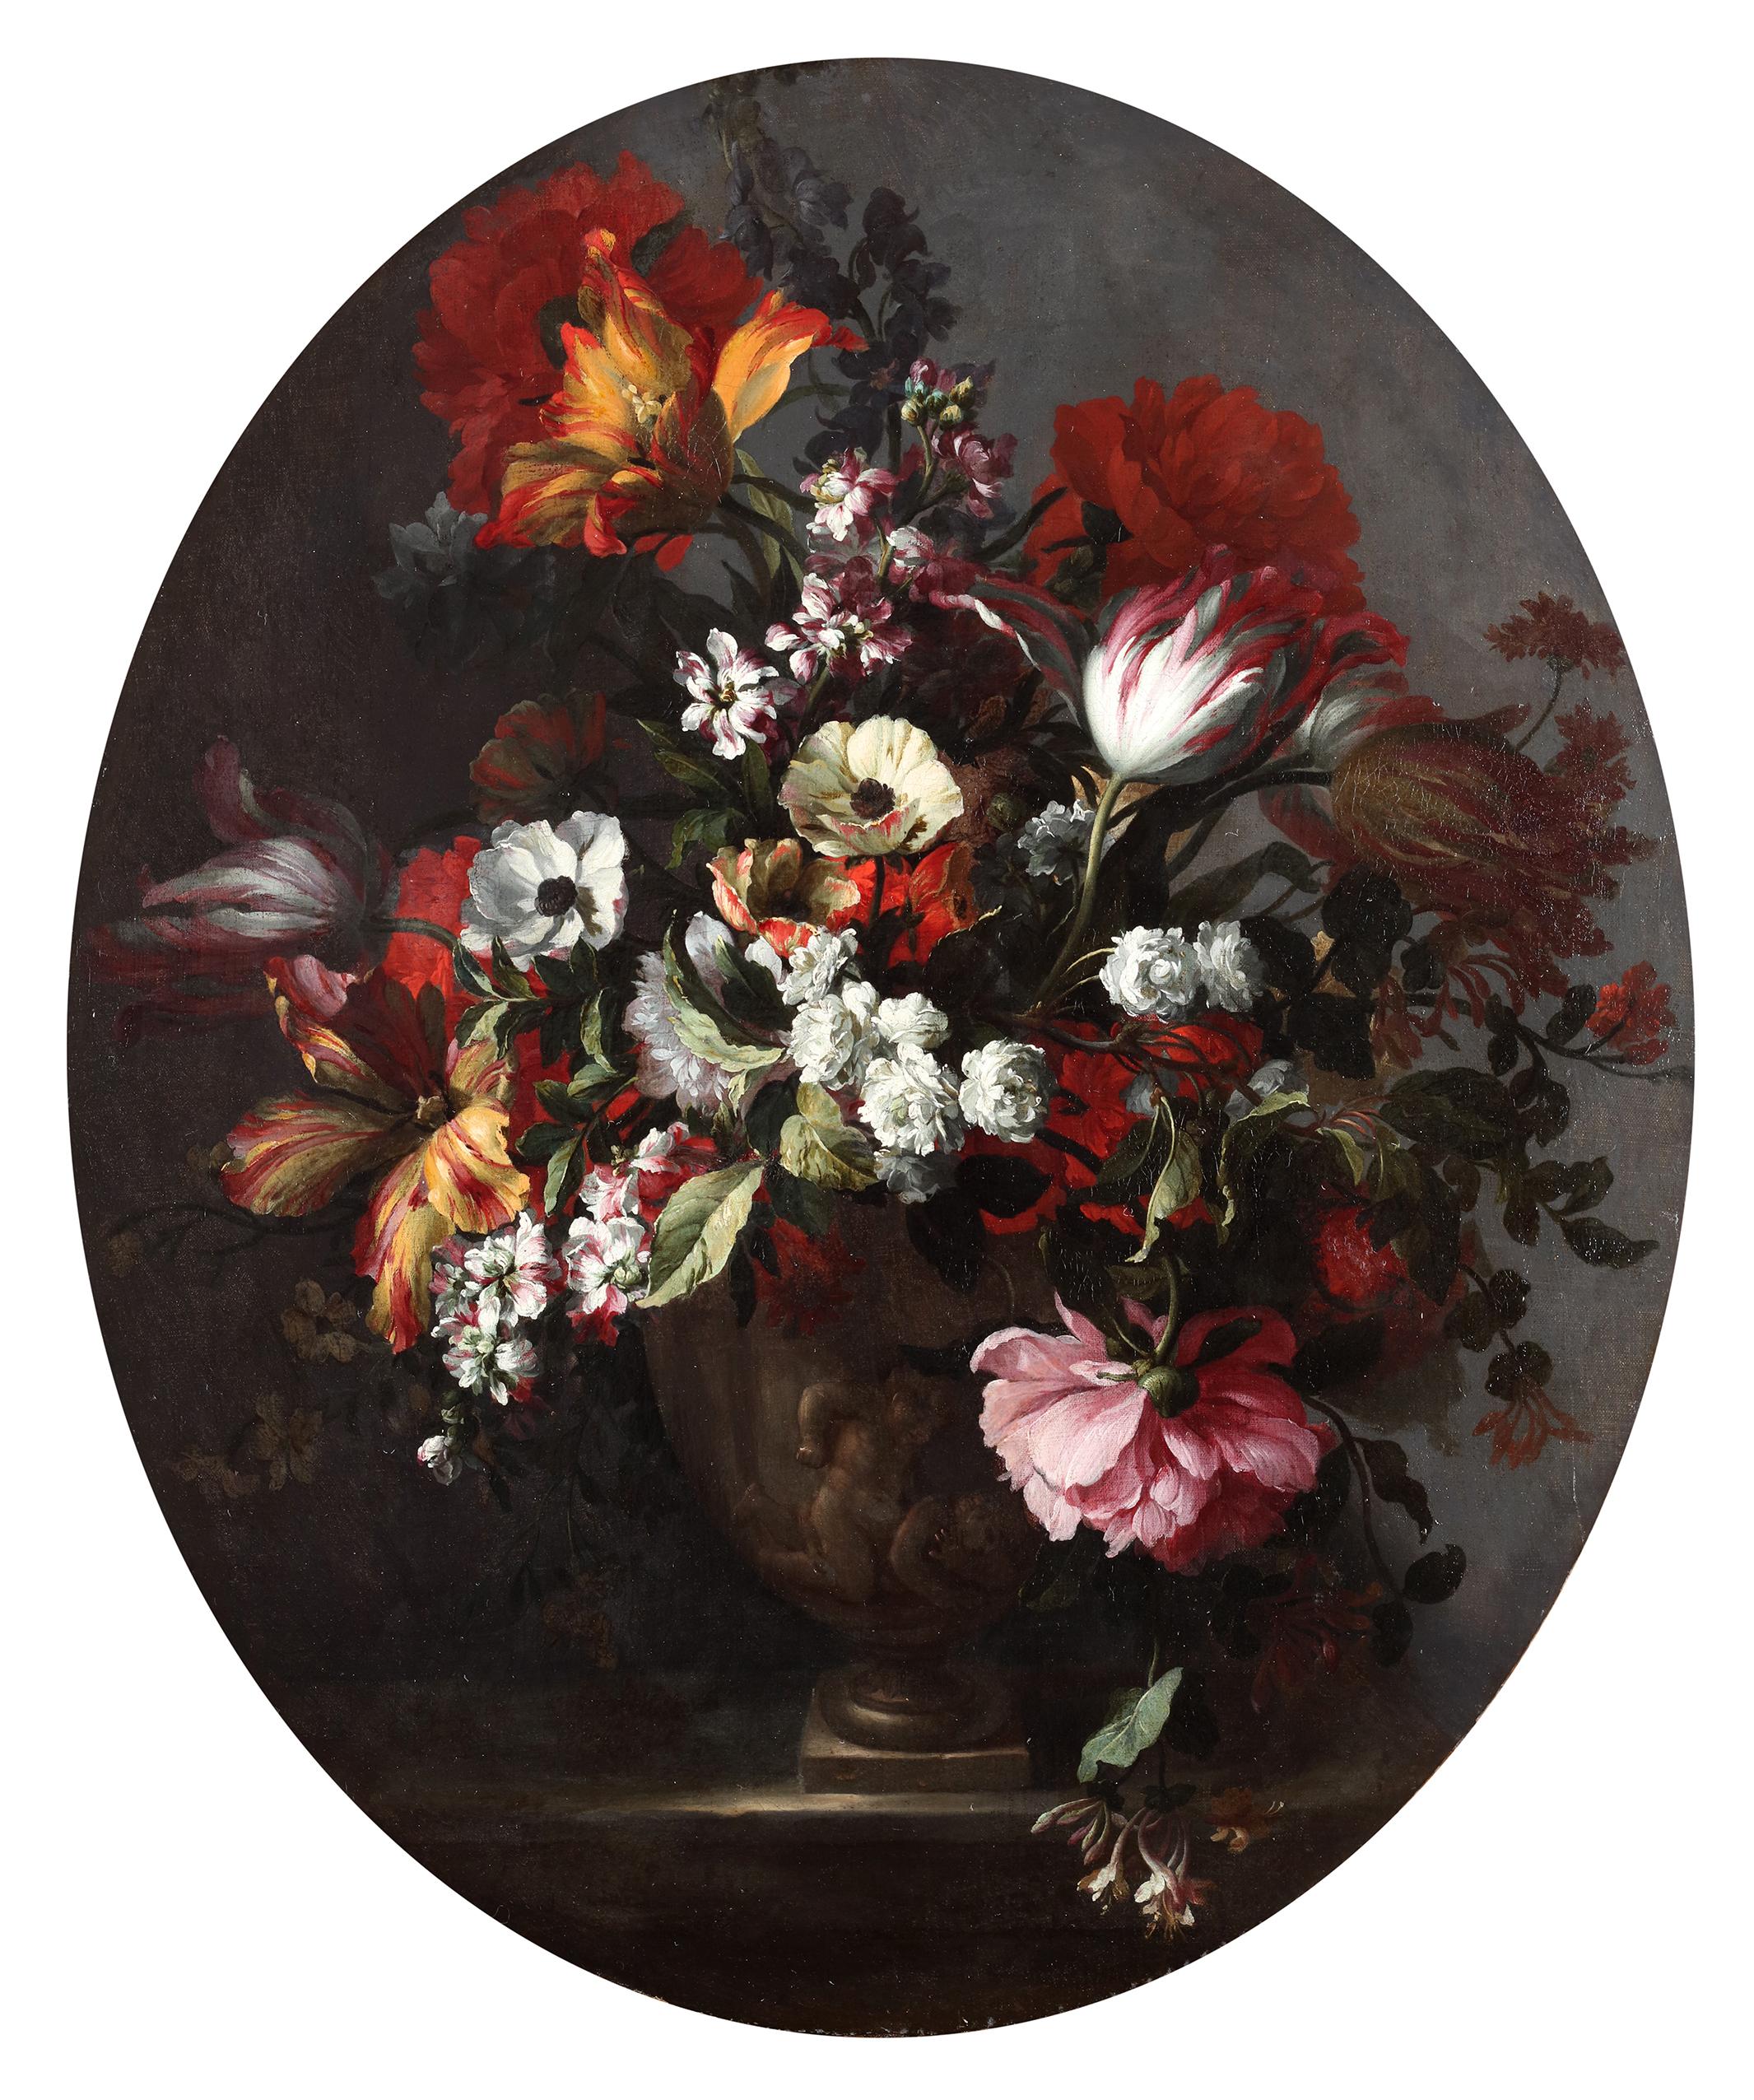 Oil on panel

We'd like to thank Dr. Fred Meijer for his attribution.

Jean-Baptiste Monnoyer (often referred to as ‘Baptist’ or ‘Old Baptist’) was the most influential flower painter of his generation, specializing in decorative compositions